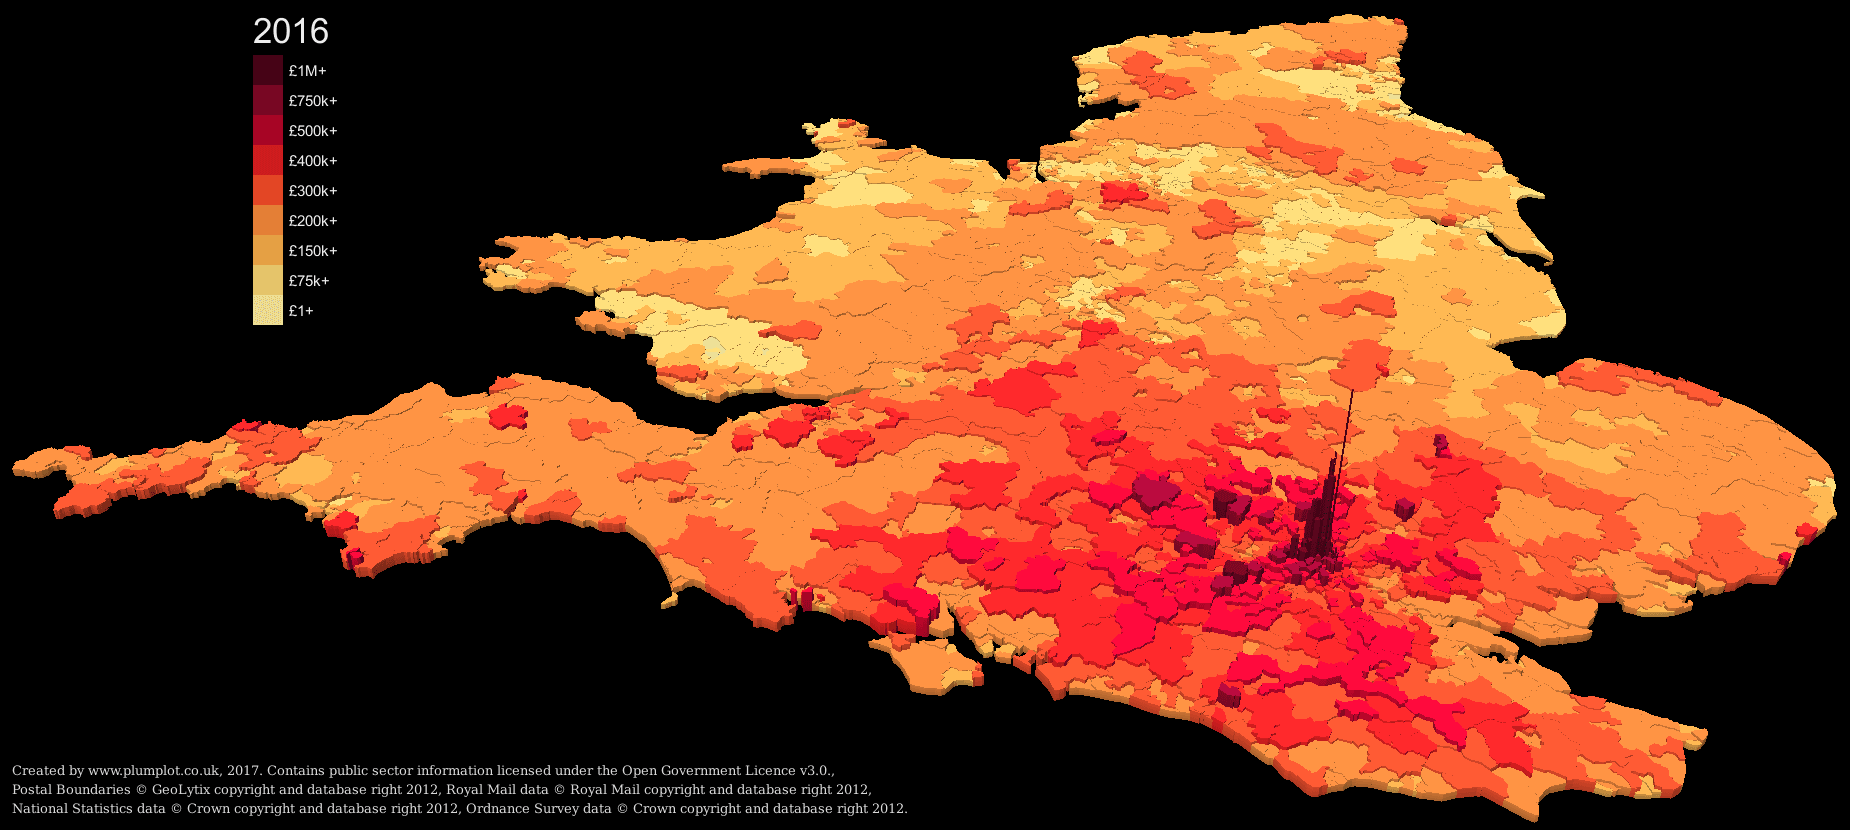 Uk average property price 3D map by postcode district.